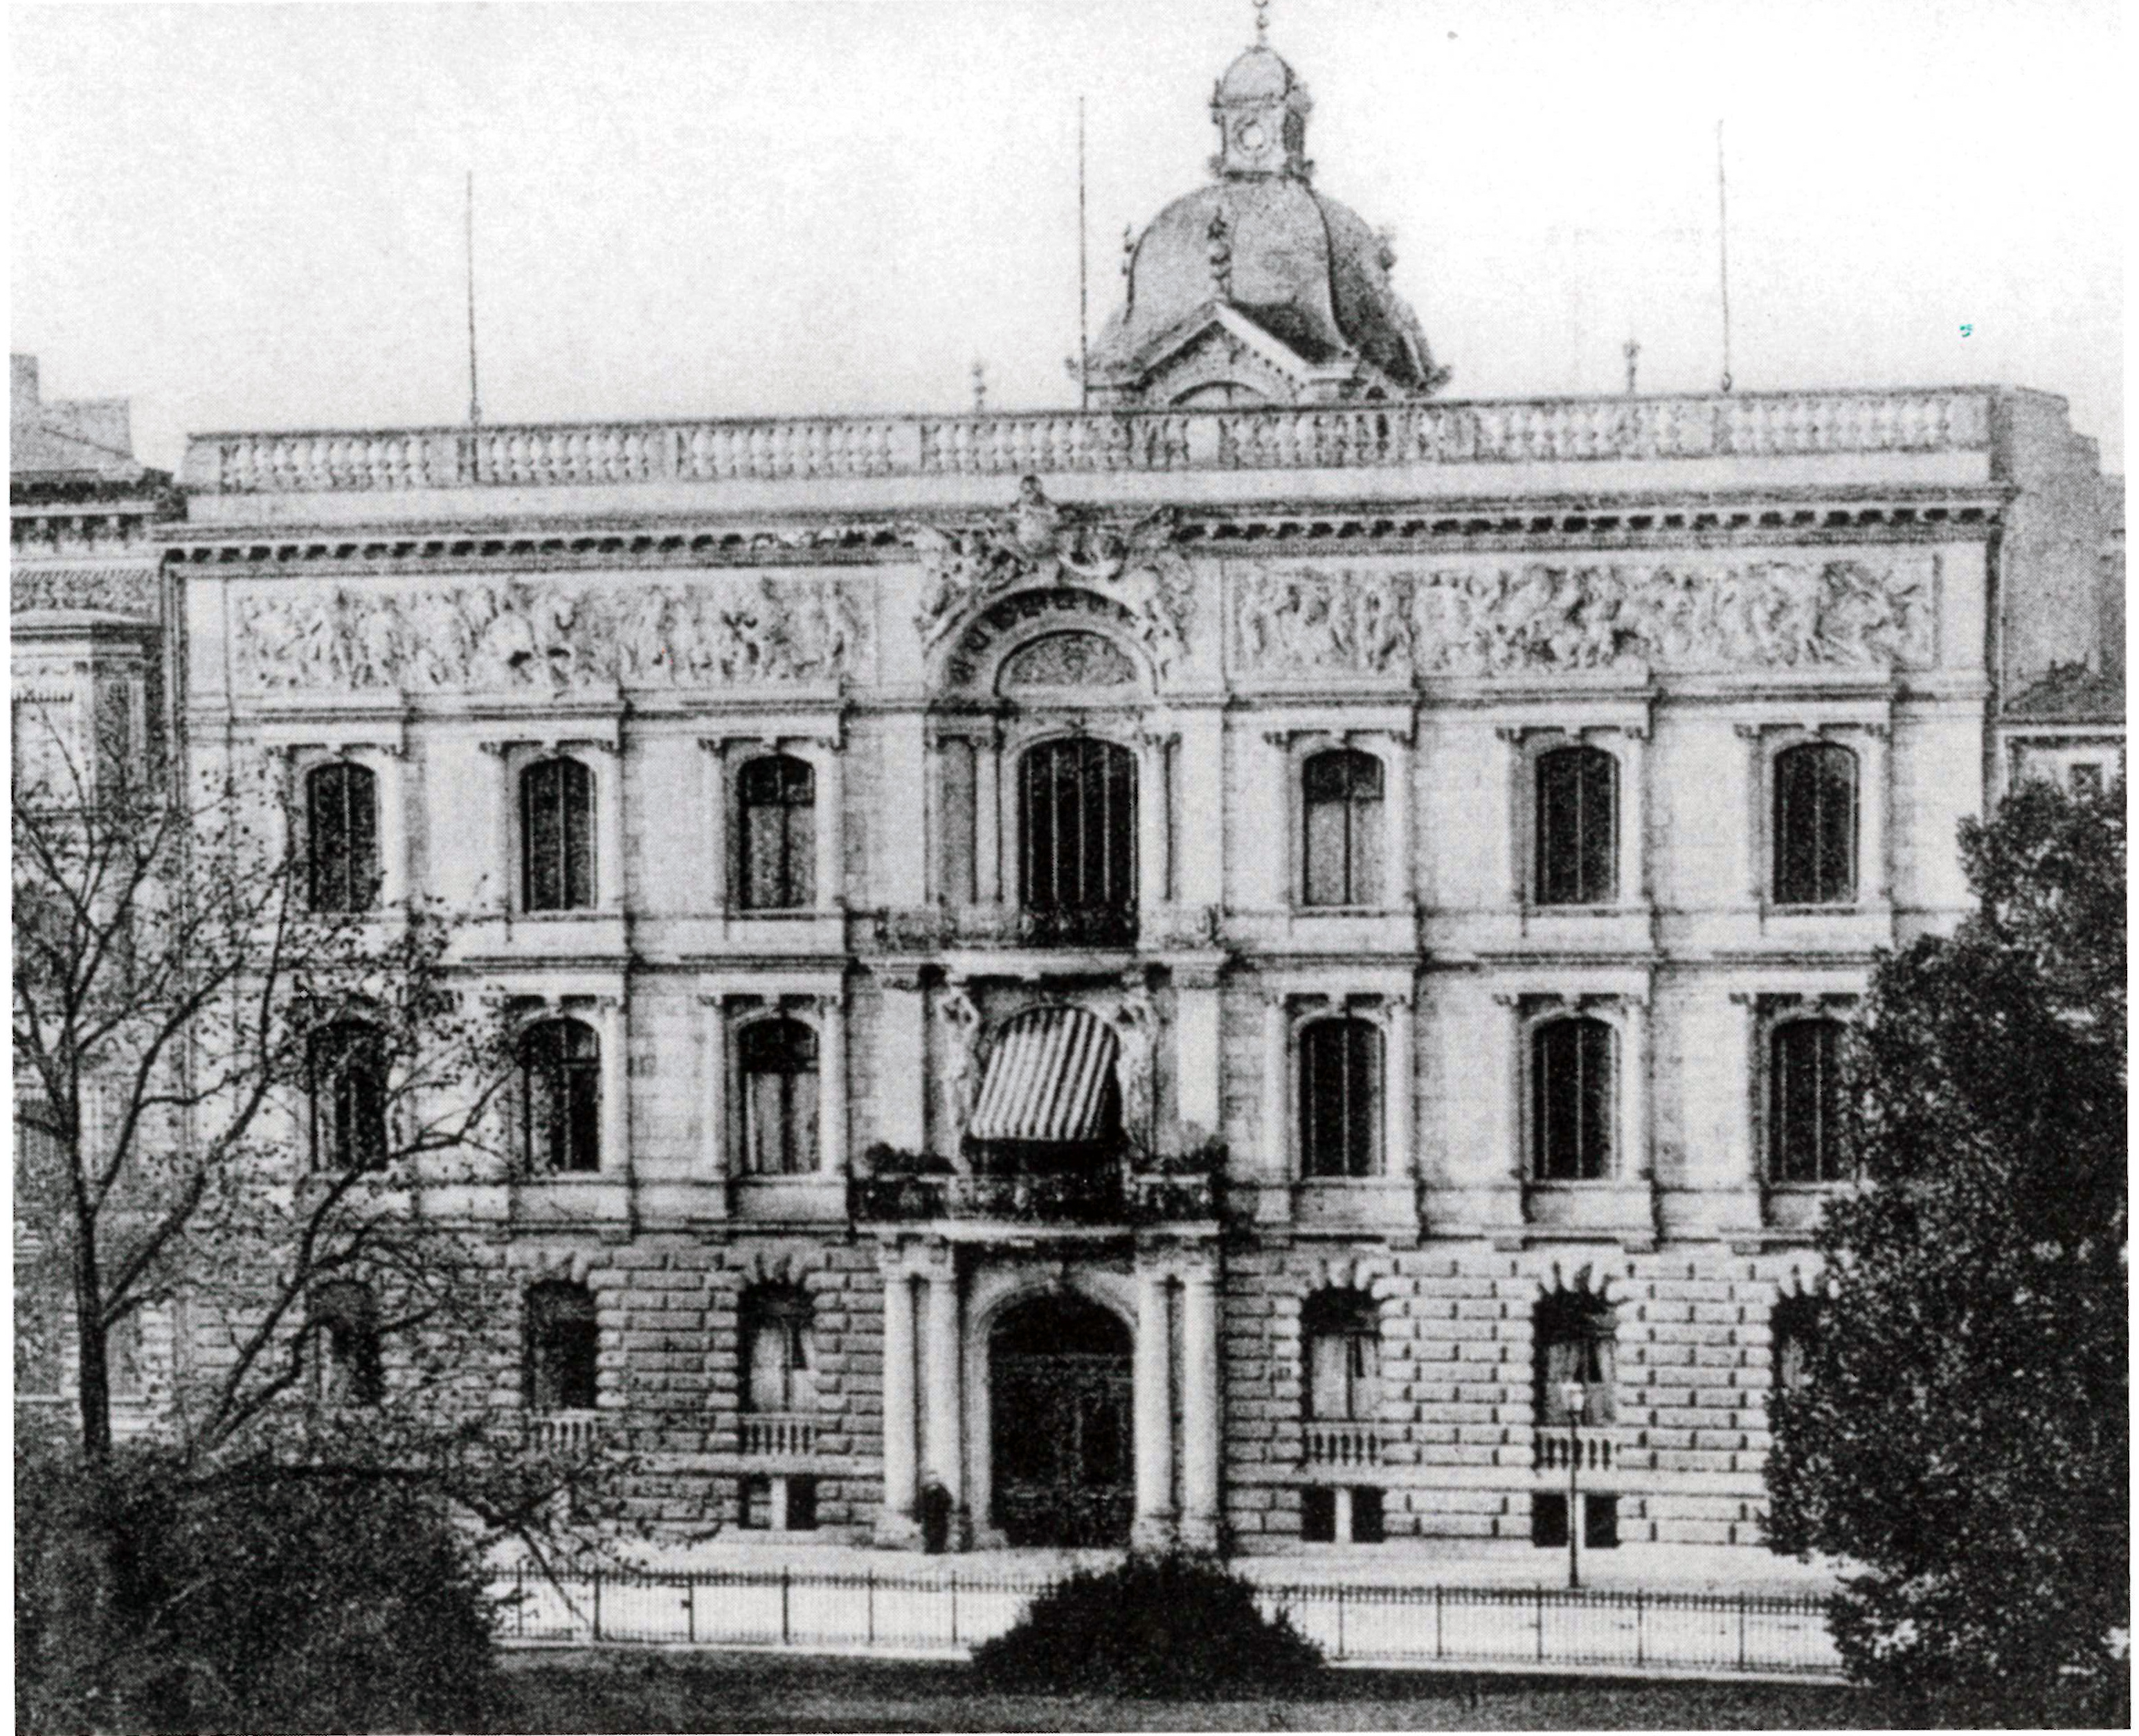 A black and white image of the three or four story Mosse Palais.